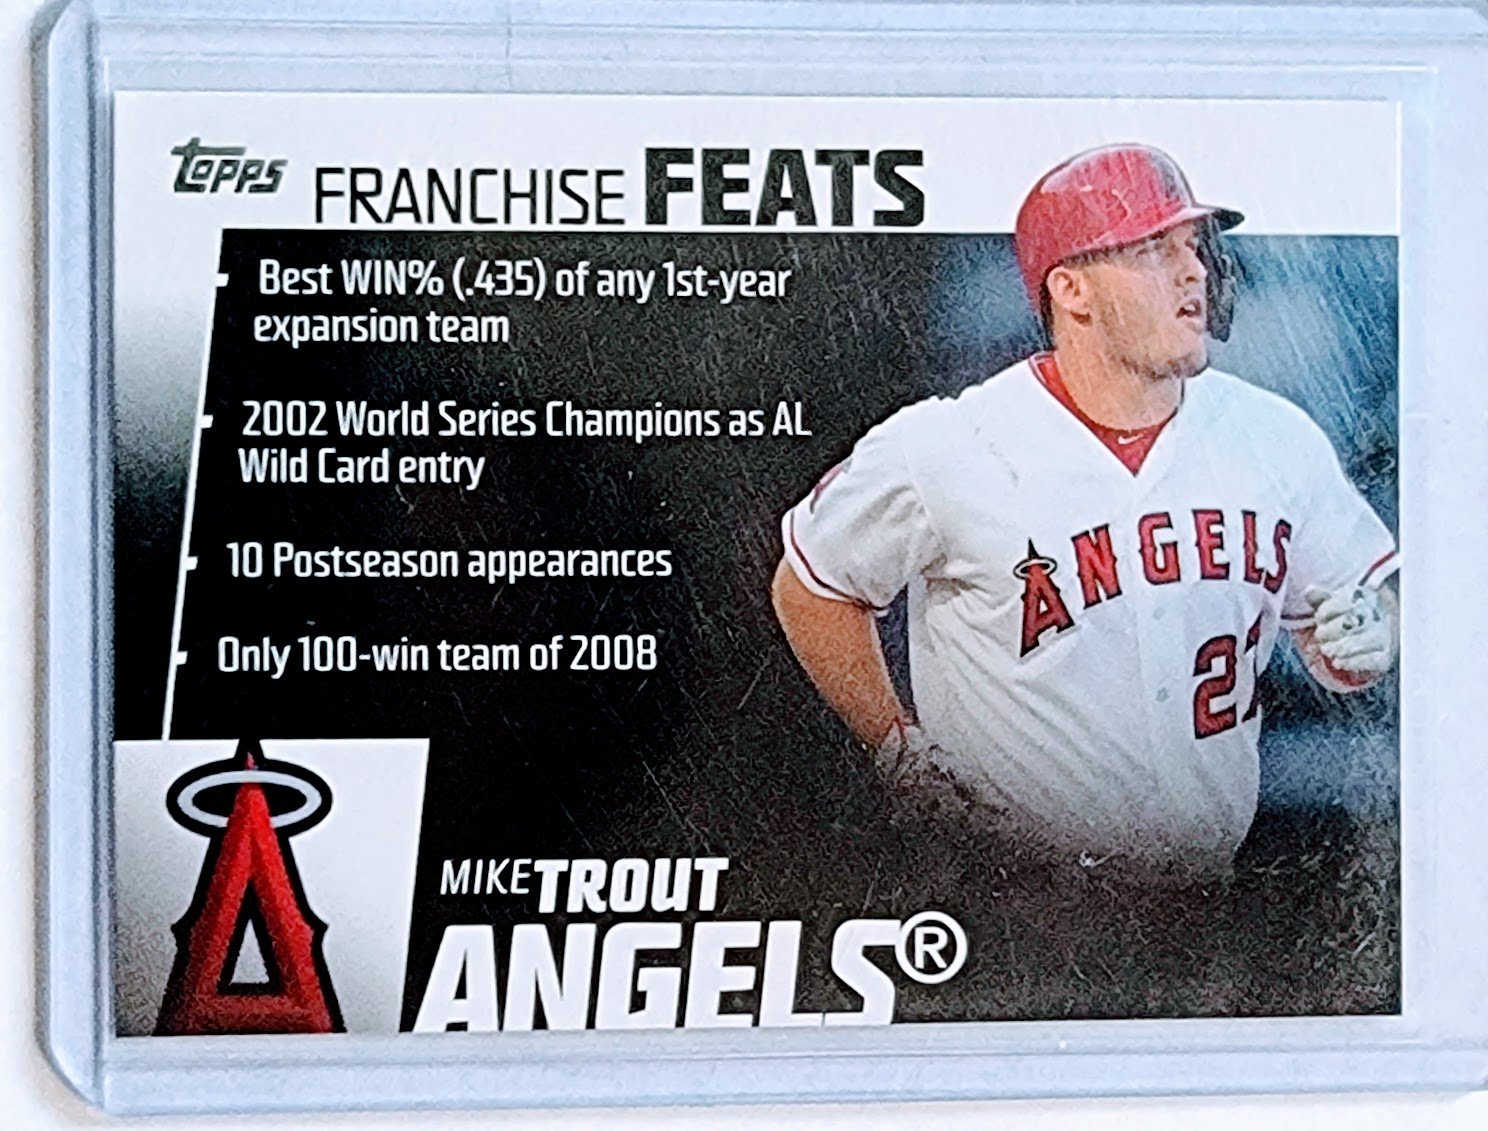 2019 Topps Mike Trout Franchise Feats Baseball Card TPTV simple Xclusive Collectibles   